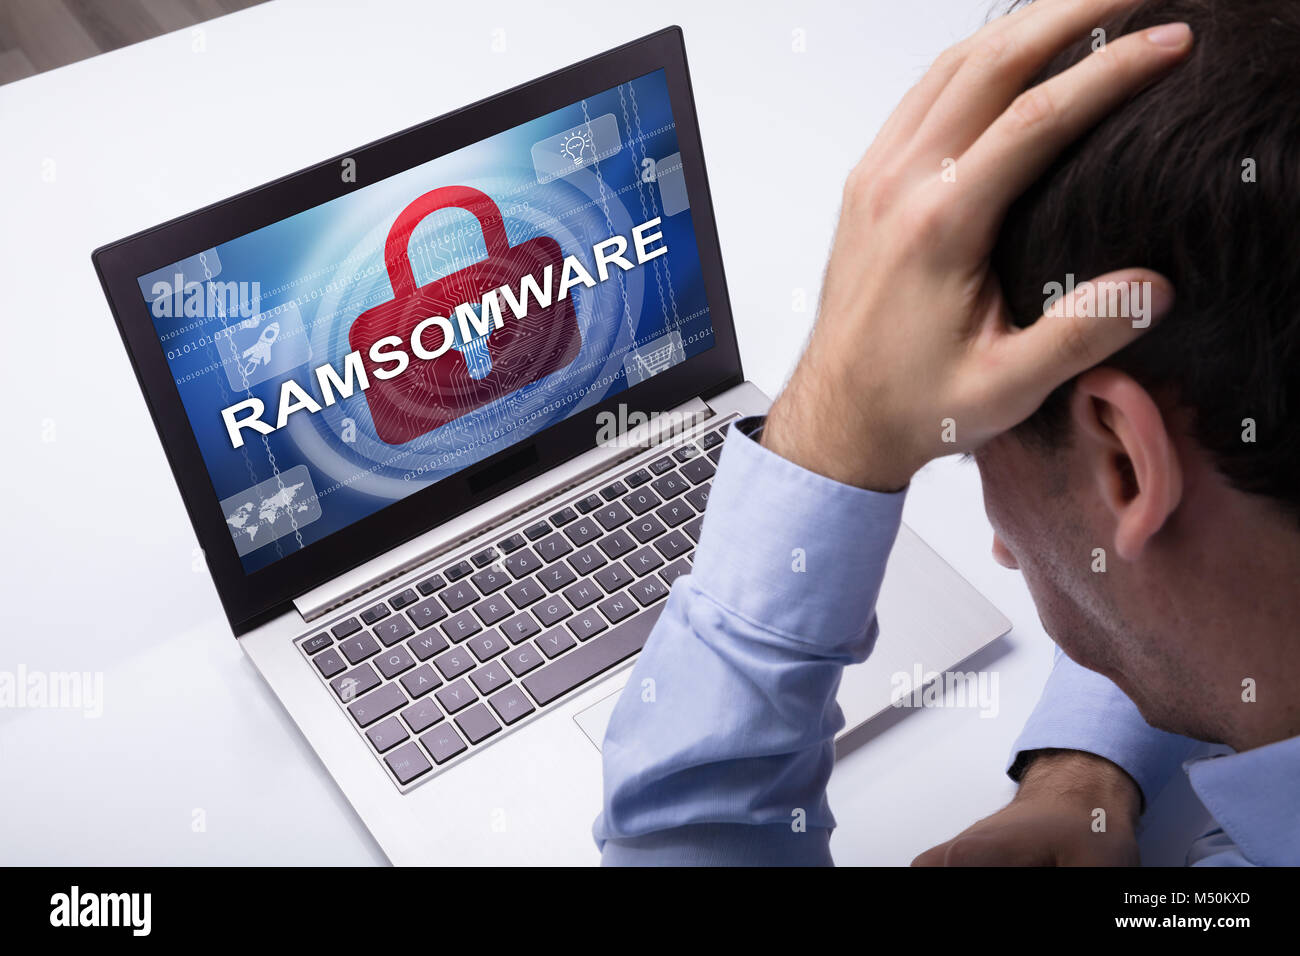 Worried Businessman Looking At Laptop With Ramsomware Word On The Screen At The Workplace Stock Photo